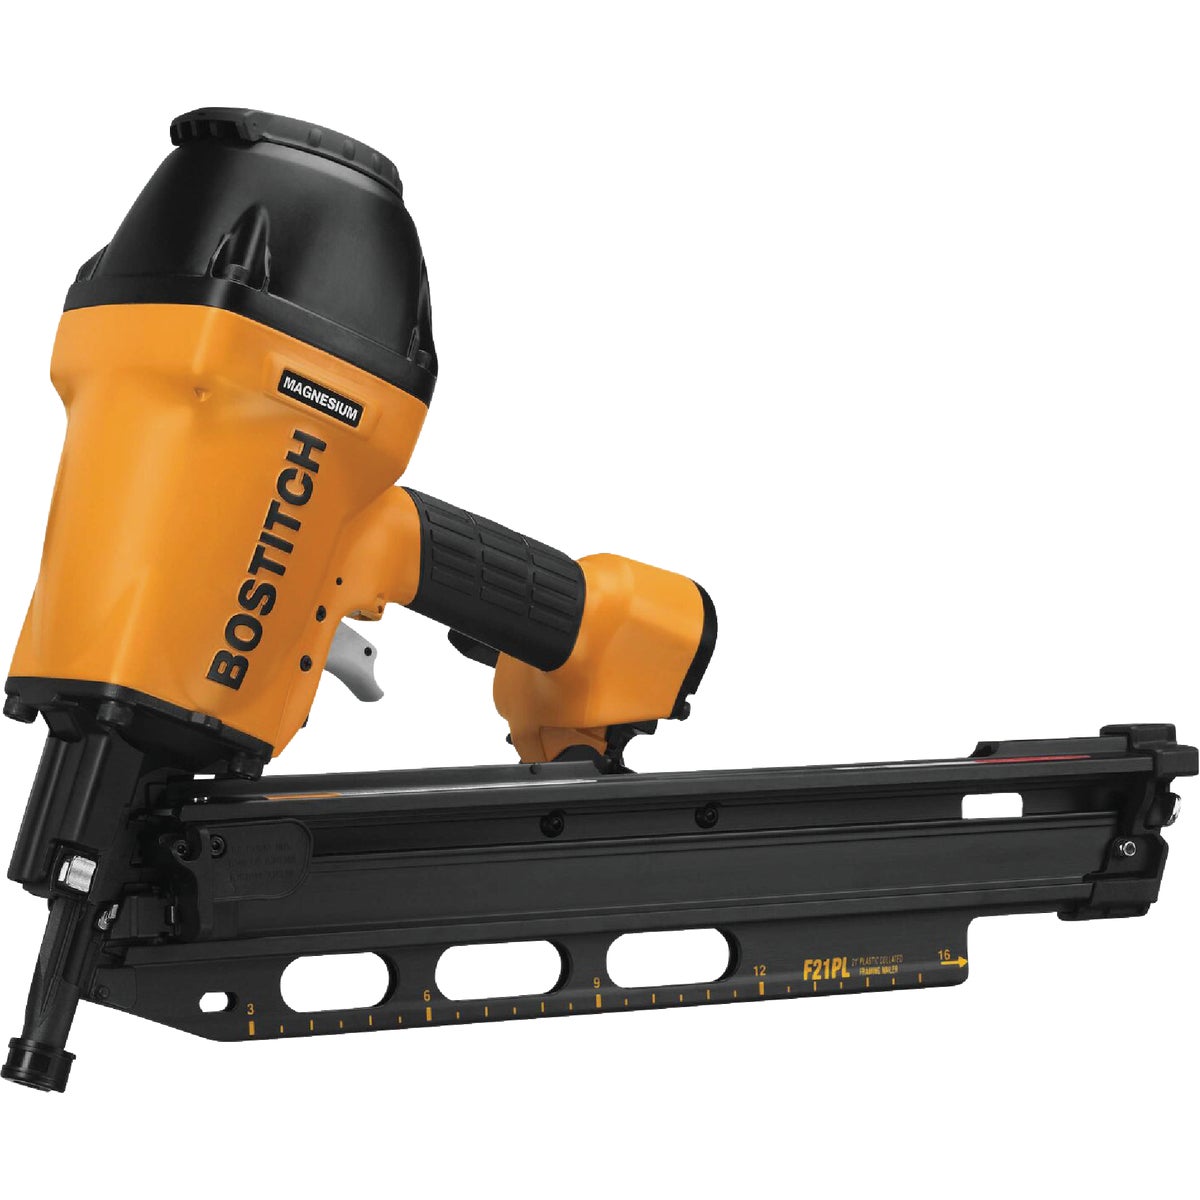 Bostitch 21 Degree 3-1/2 In. Plastic Collated Framing Nailer